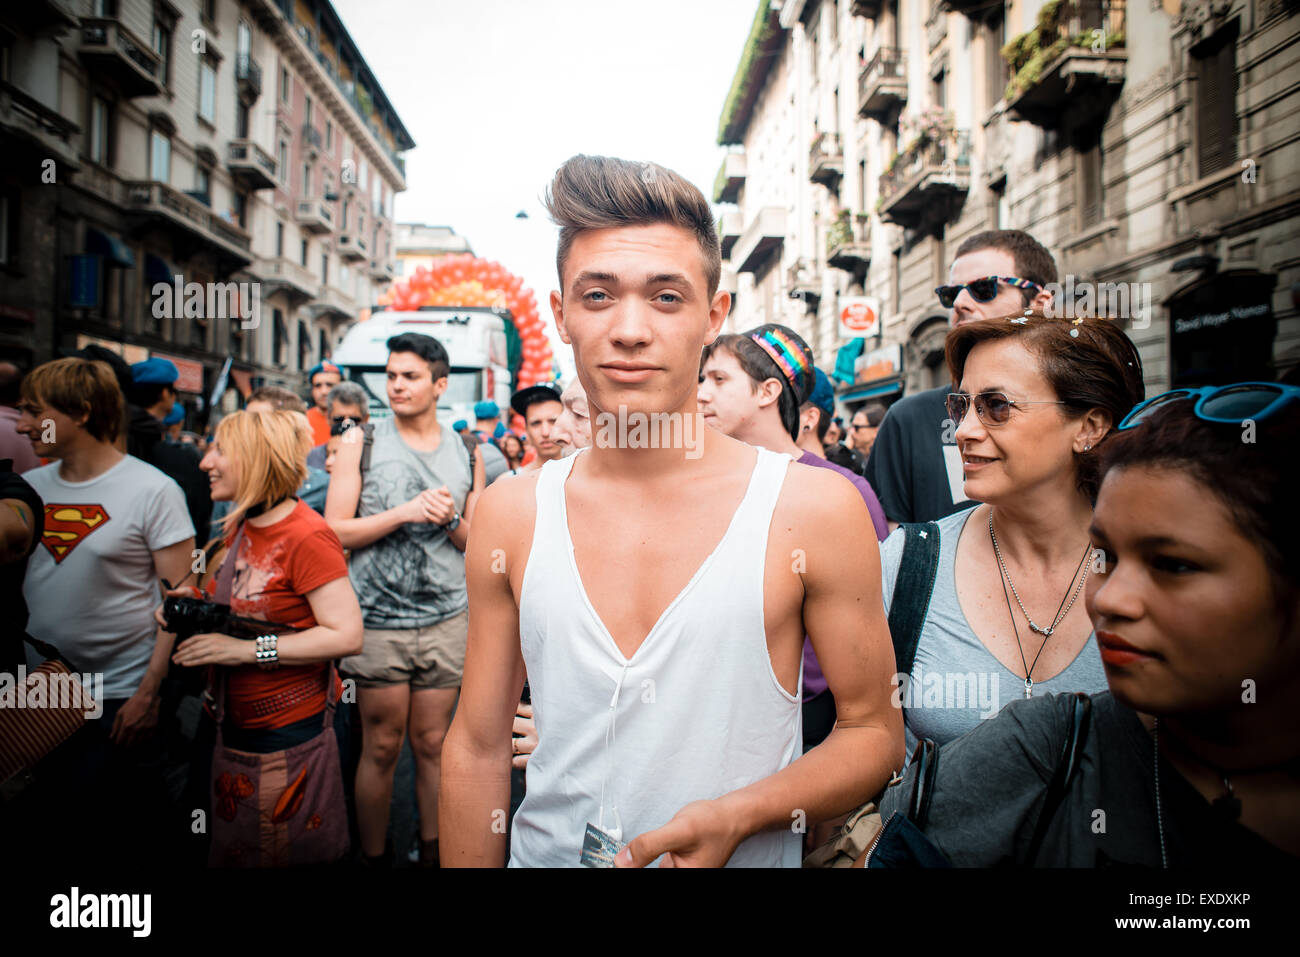 MILAN, ITALY - JUNE 29: gay pride manifestation in Milan June 29, 2013. Normal people, gay, lesbians, transgenders and bisexuals take to the street for their rights organizing a street parade party Stock Photo